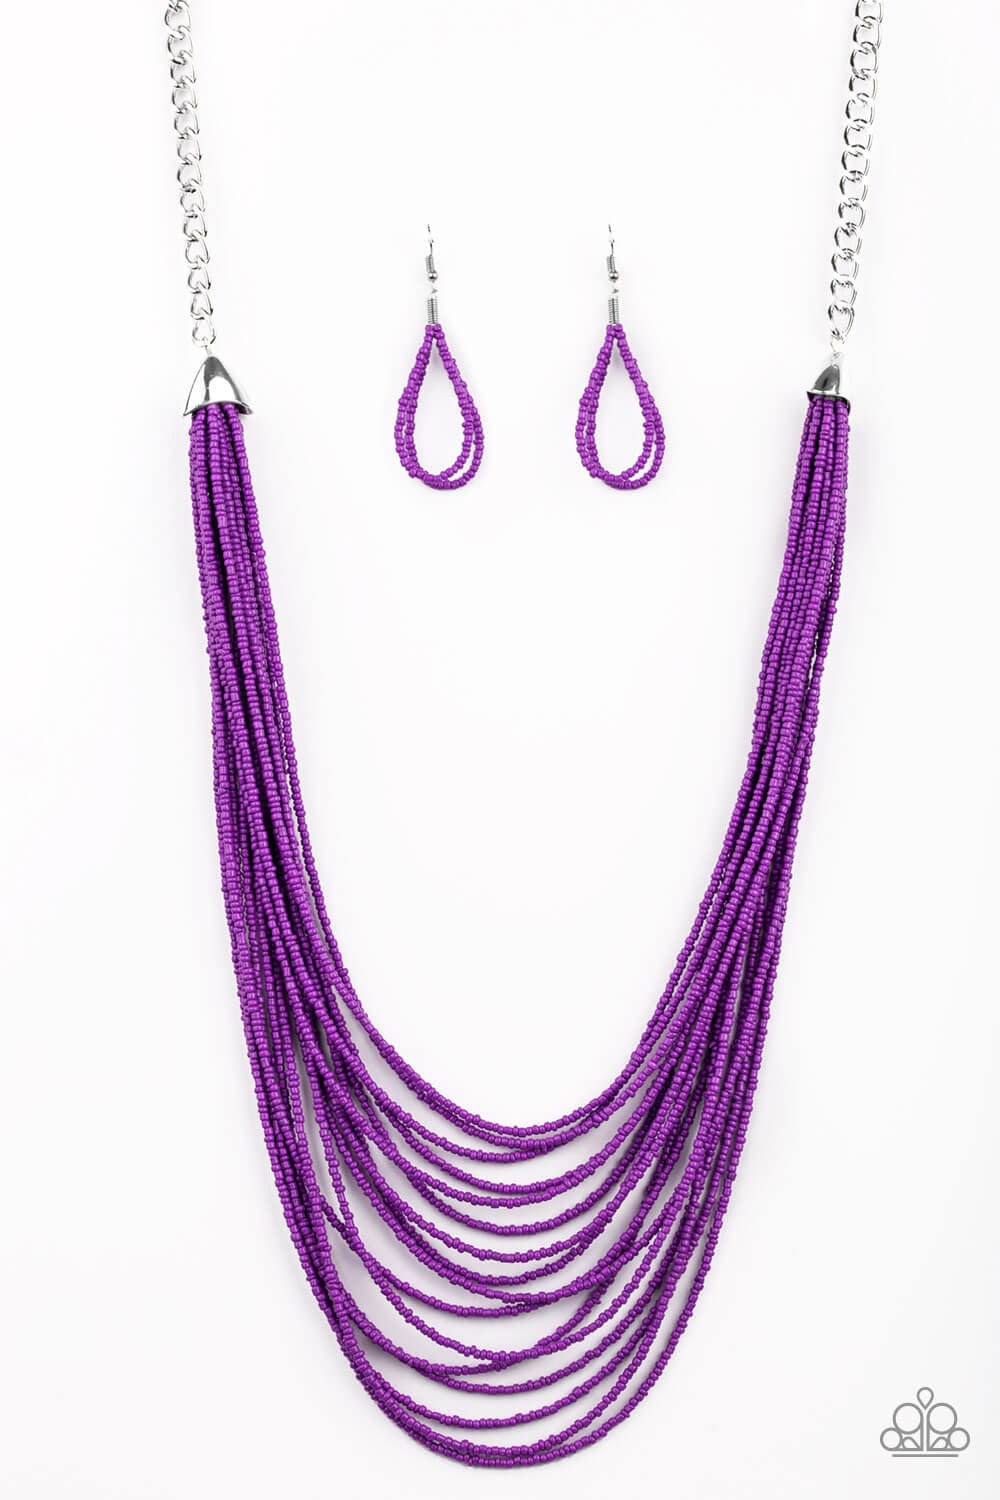 Paparazzi “Peacefully Pacific” Purple Seed Bead Necklace